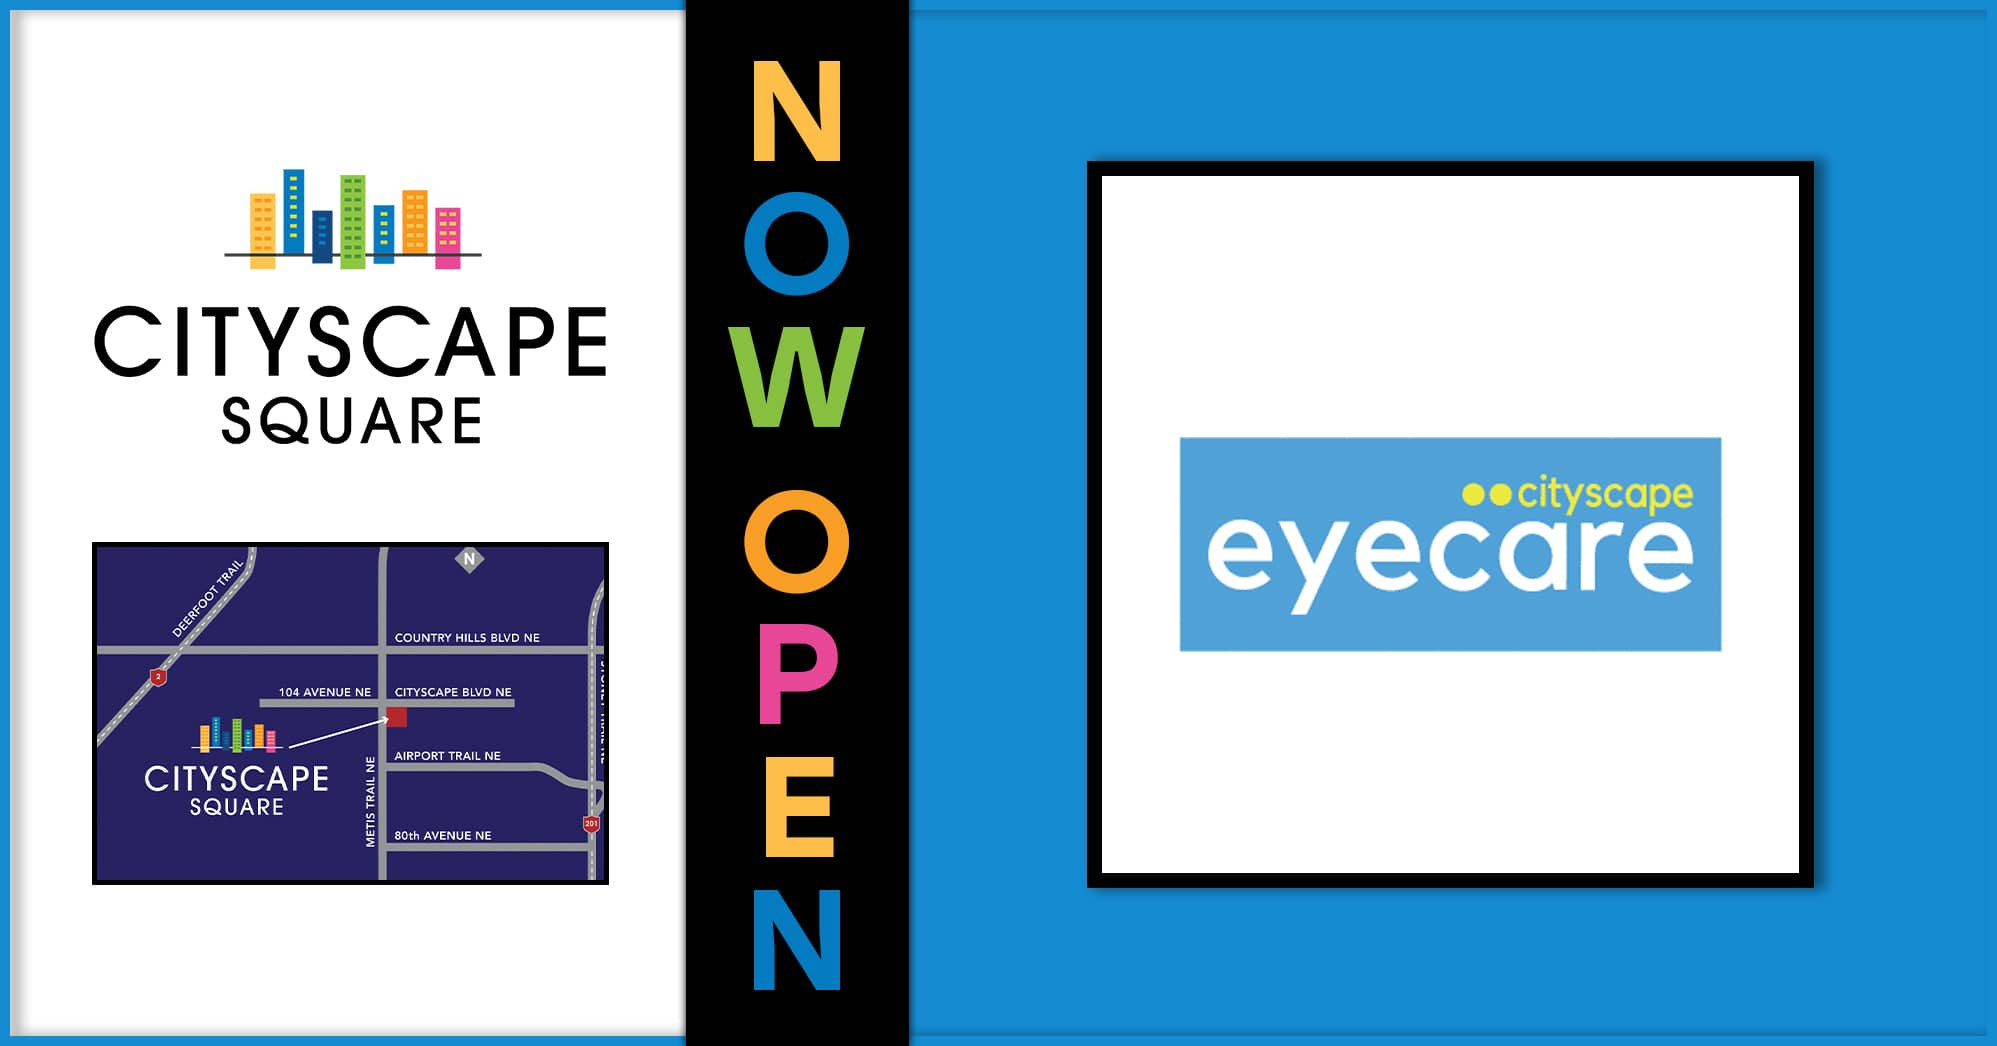 Cityscape Eyecare Is NOW OPEN!